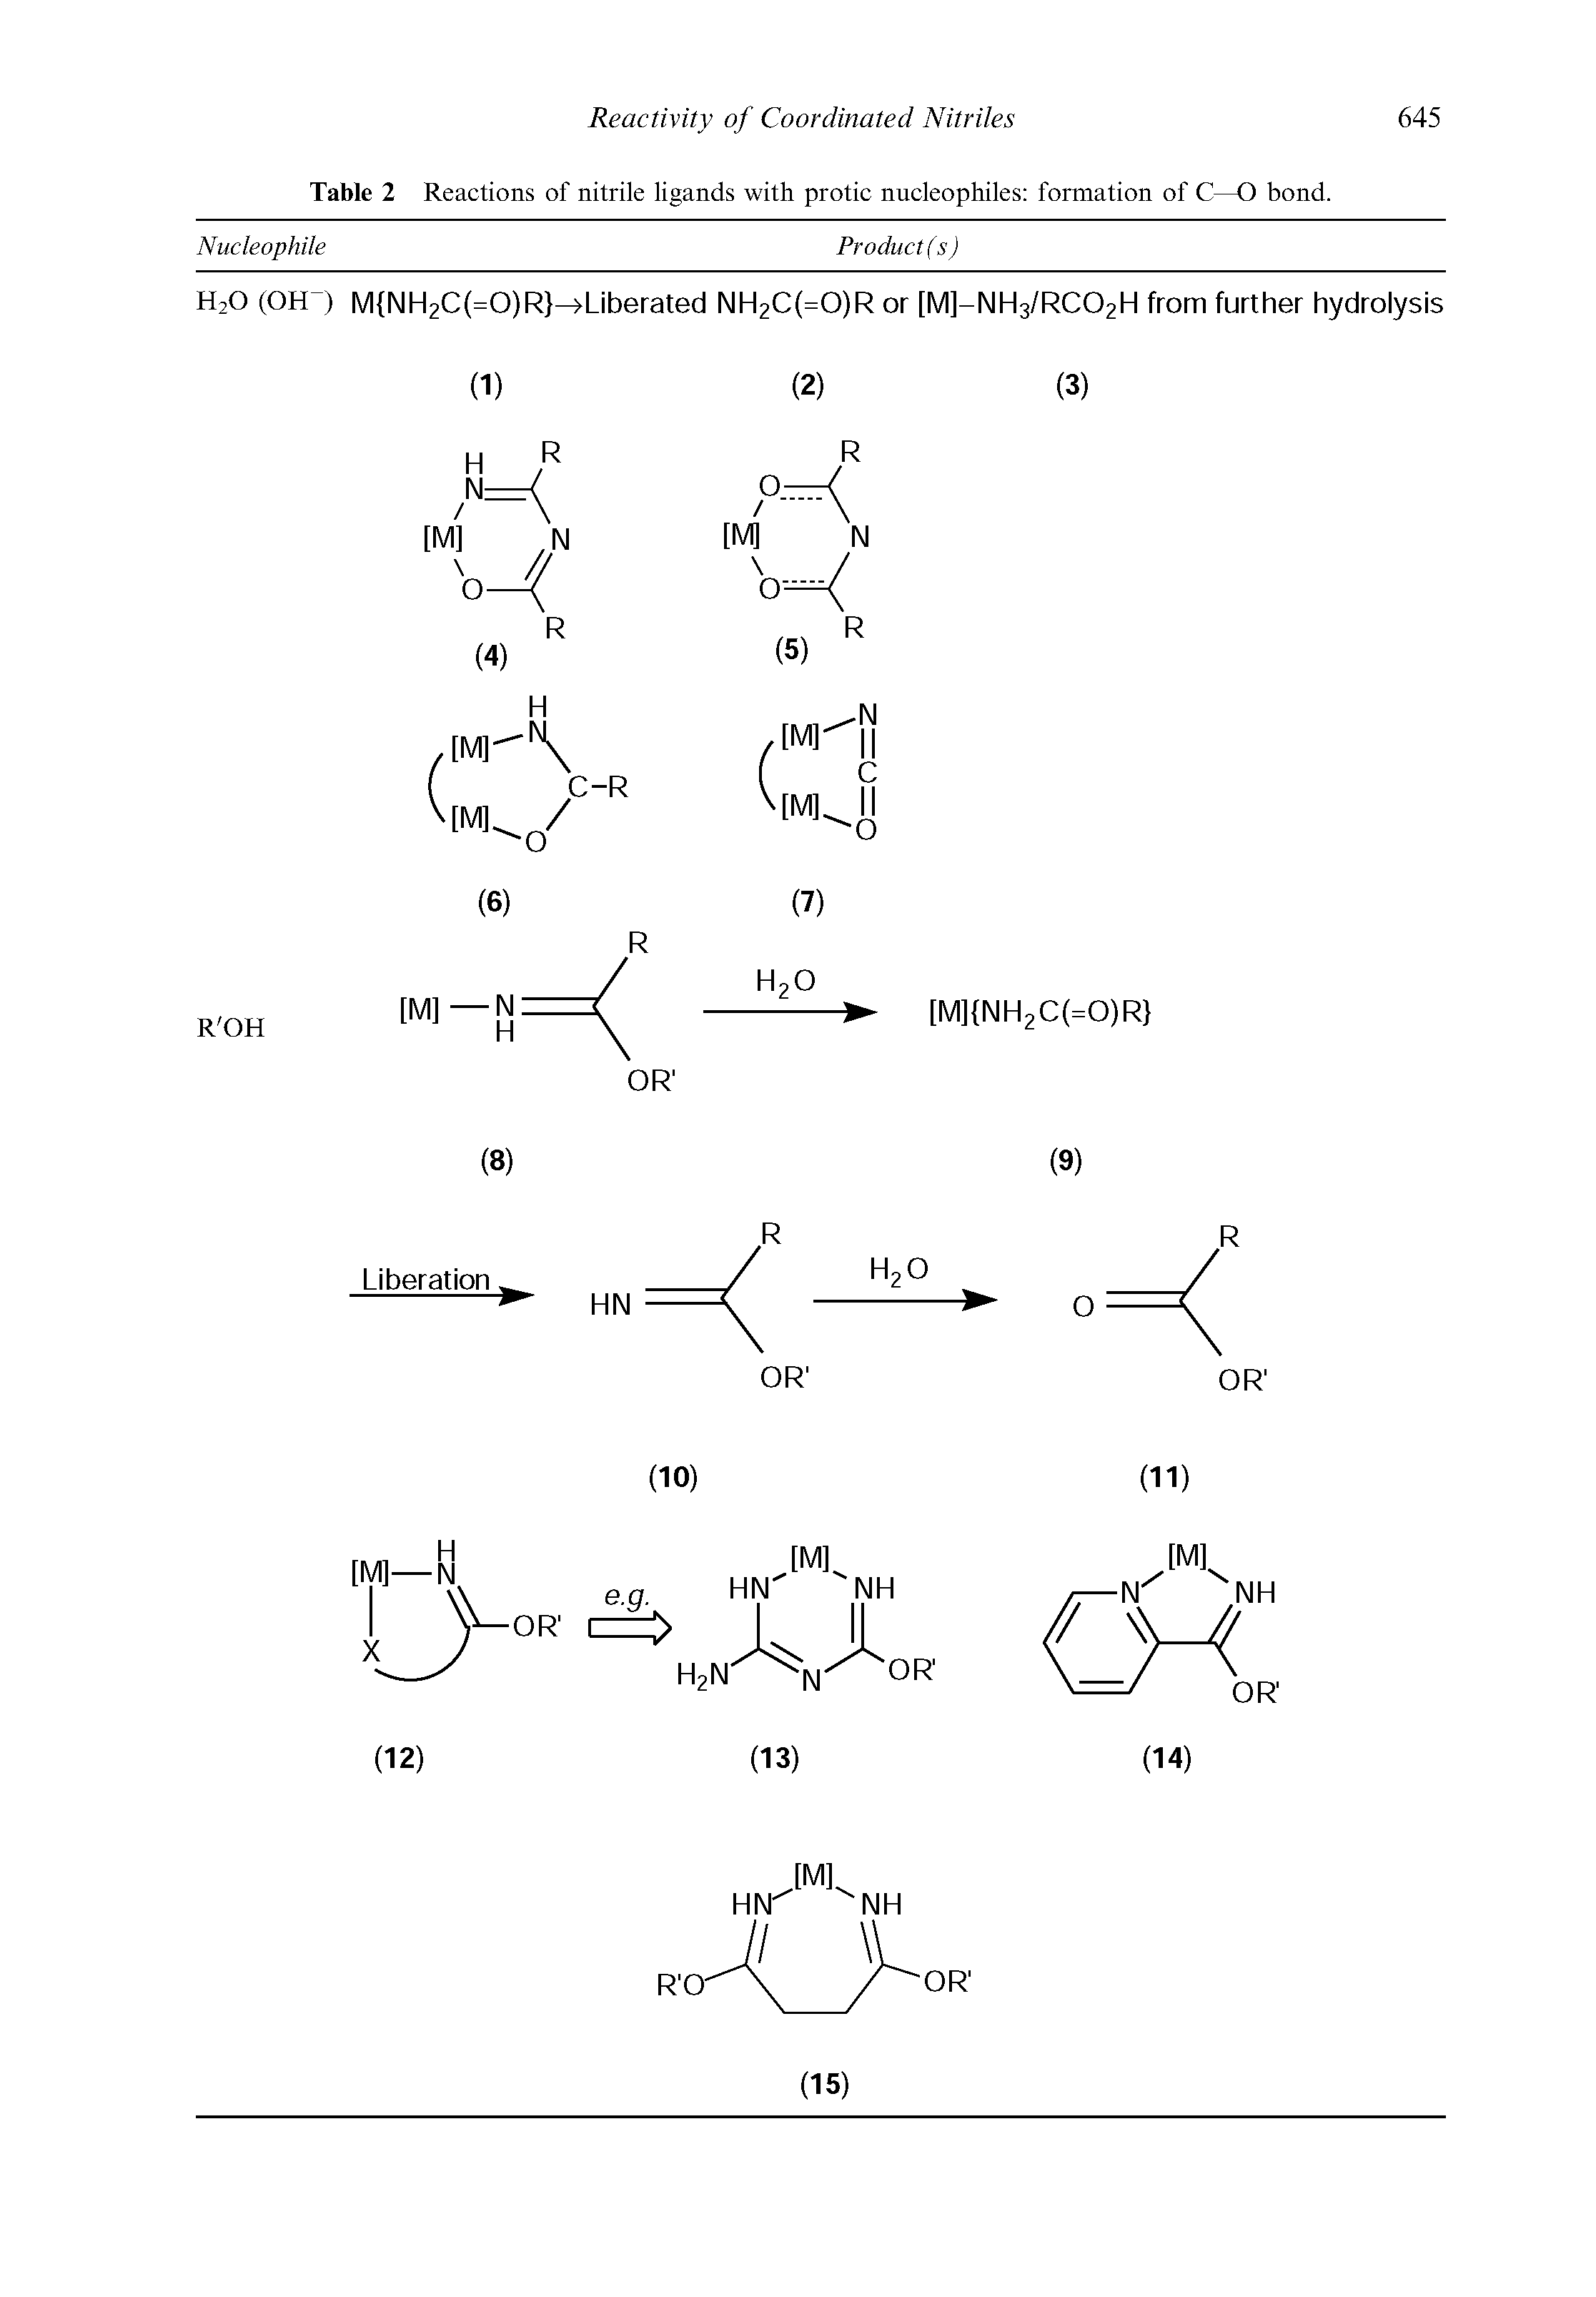 Table 2 Reactions of nitrile ligands with protic nucleophiles formation of C—O bond.